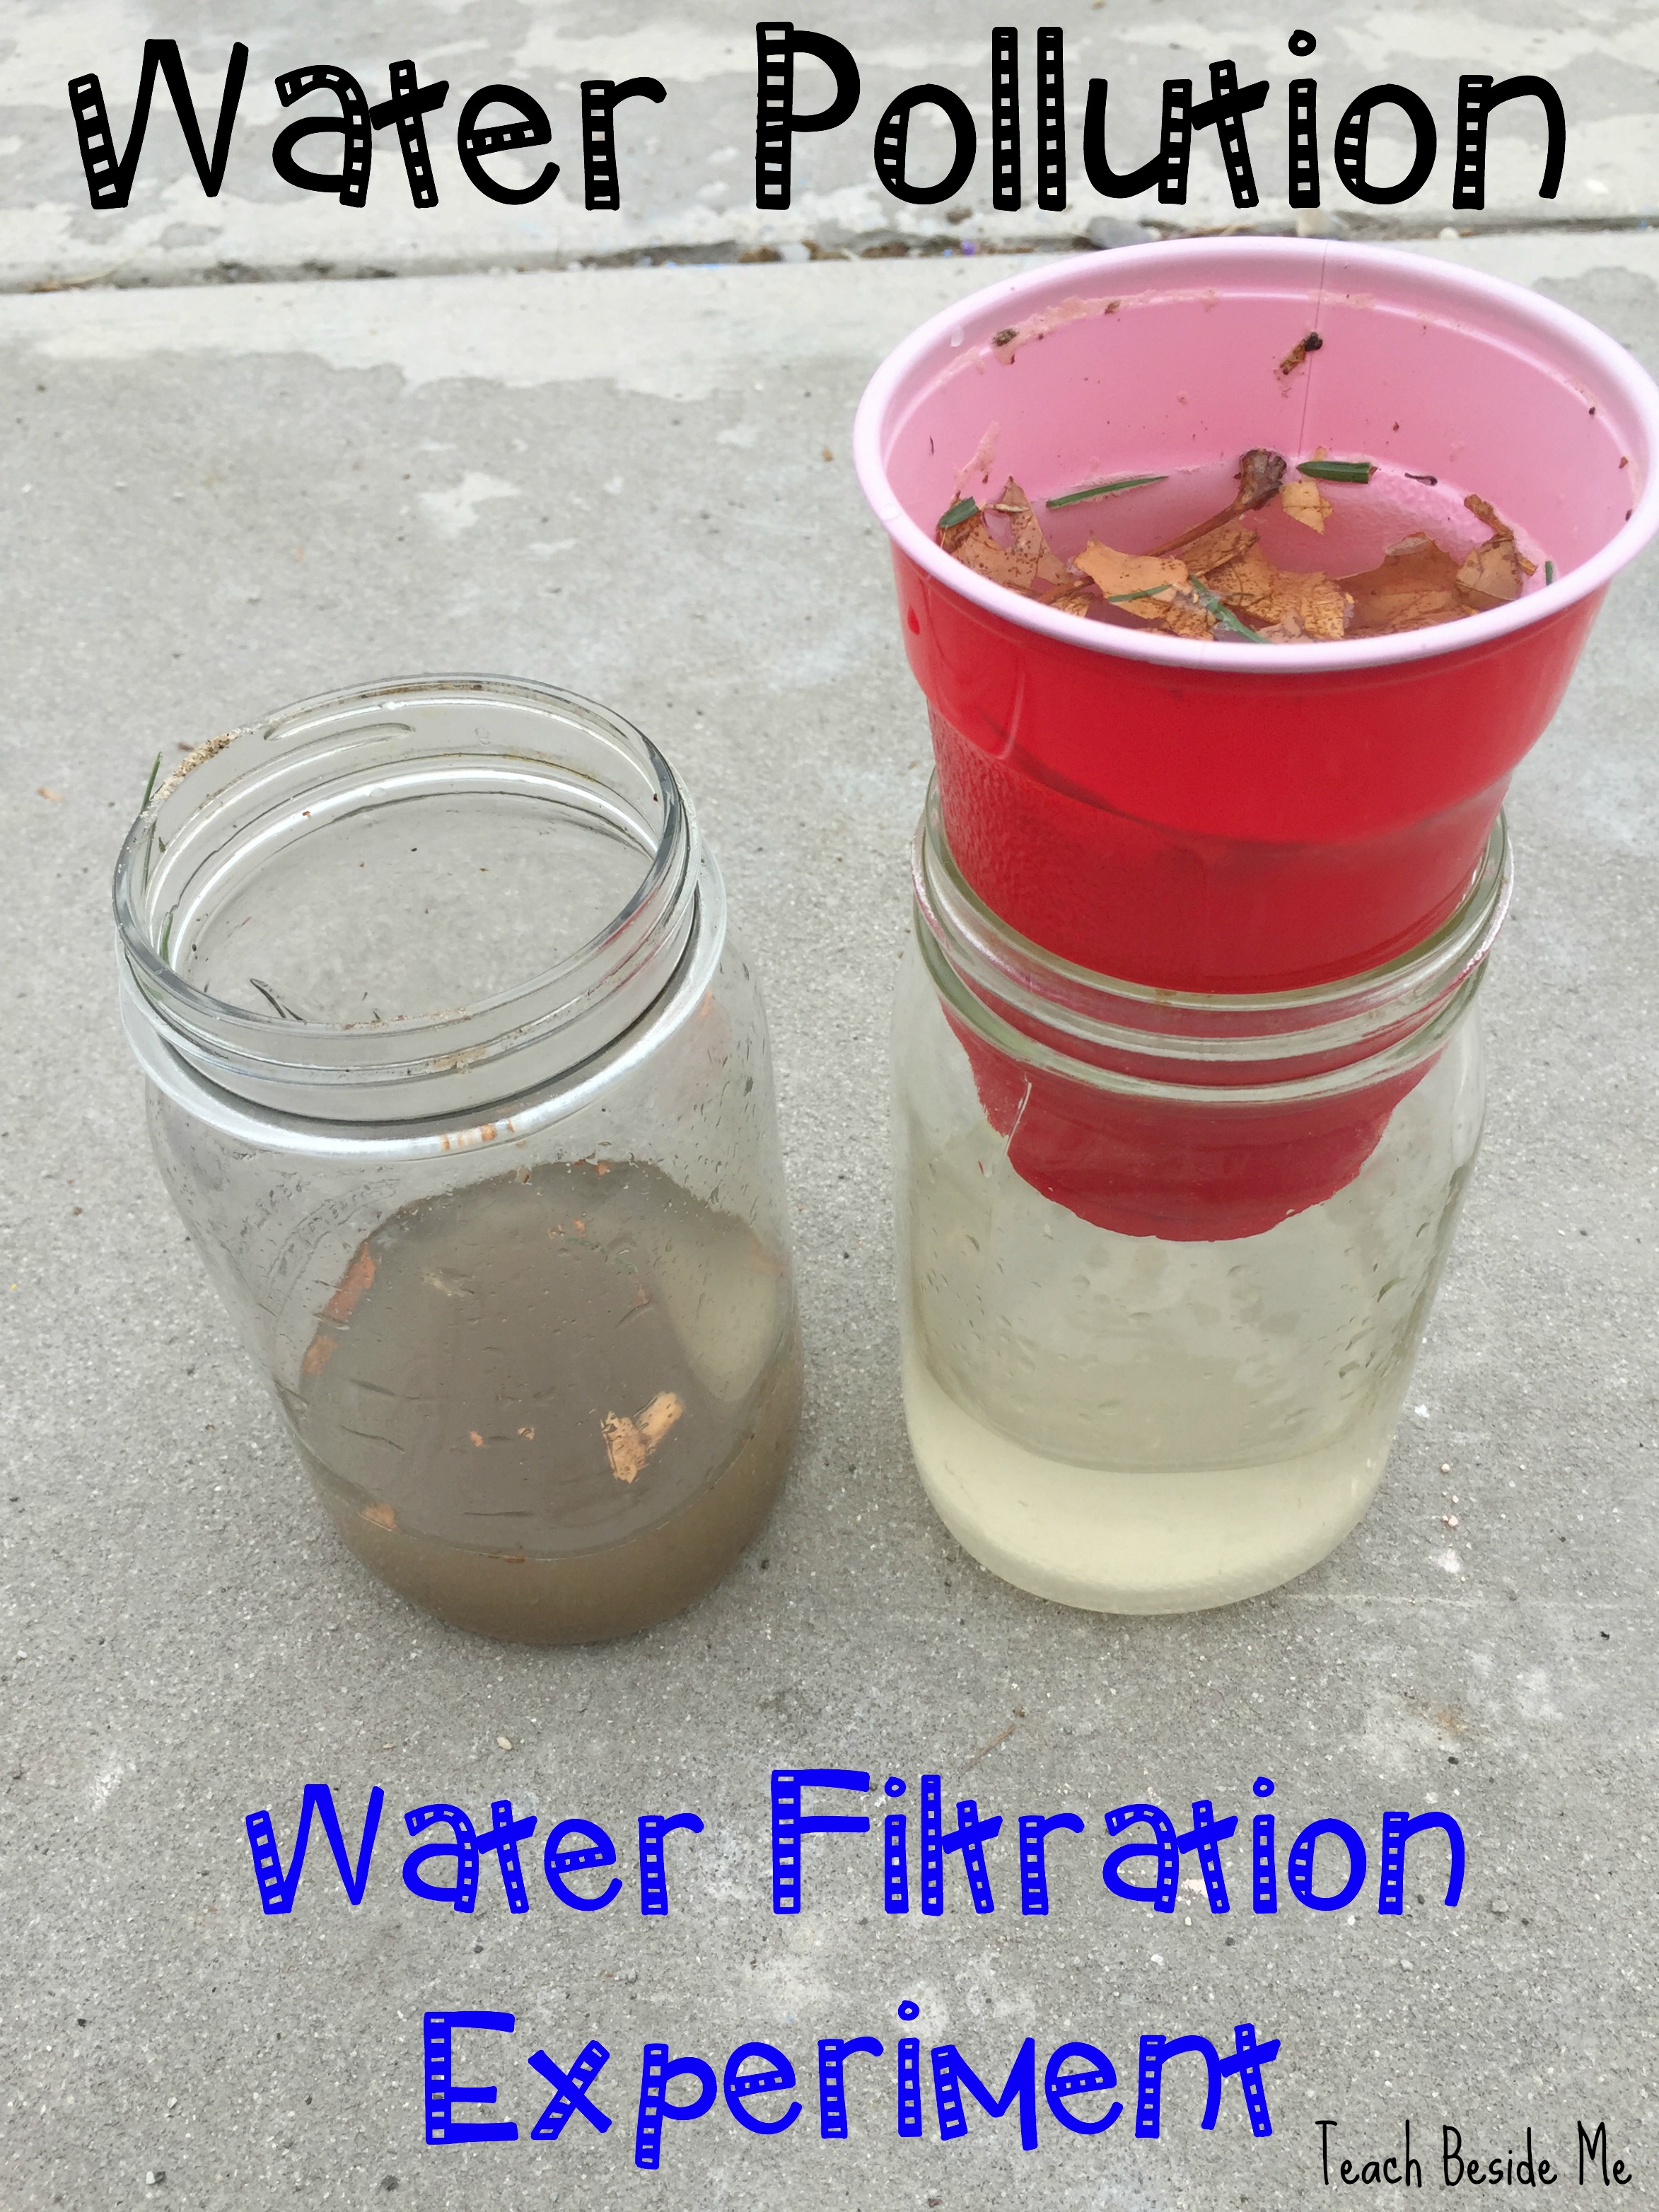 Water Filtration Experiment – Teach Beside Me